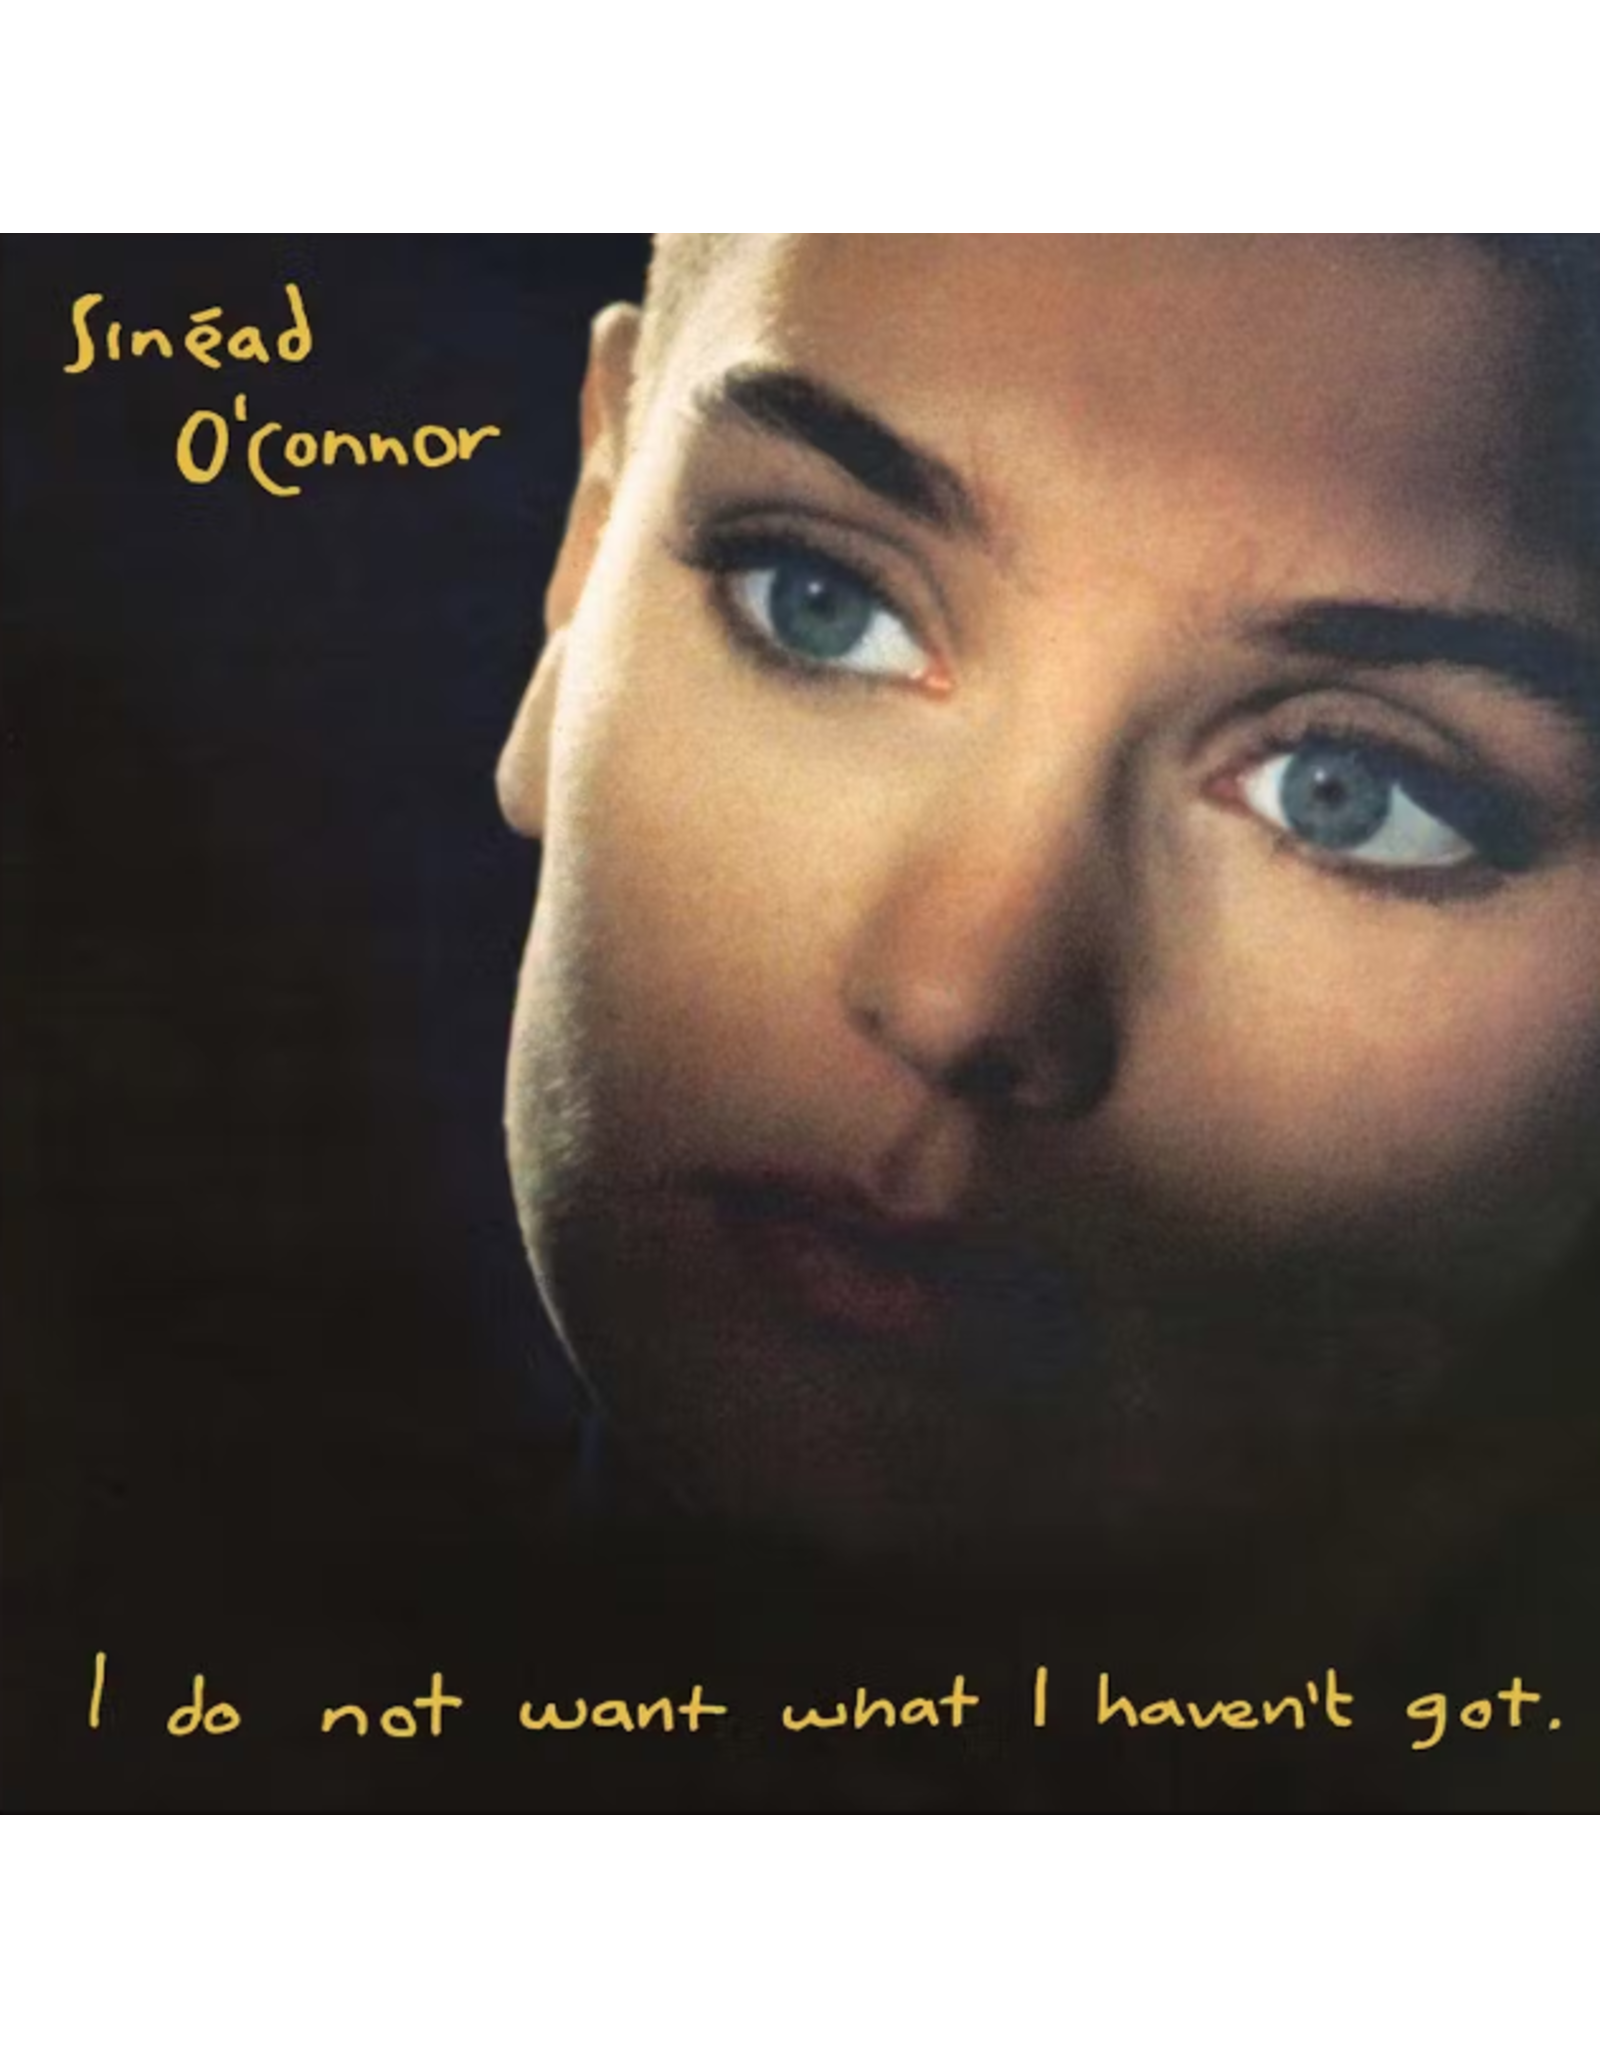 Sinead O'Connor - I Do Not Want What I Haven't Got (25th Anniversary)